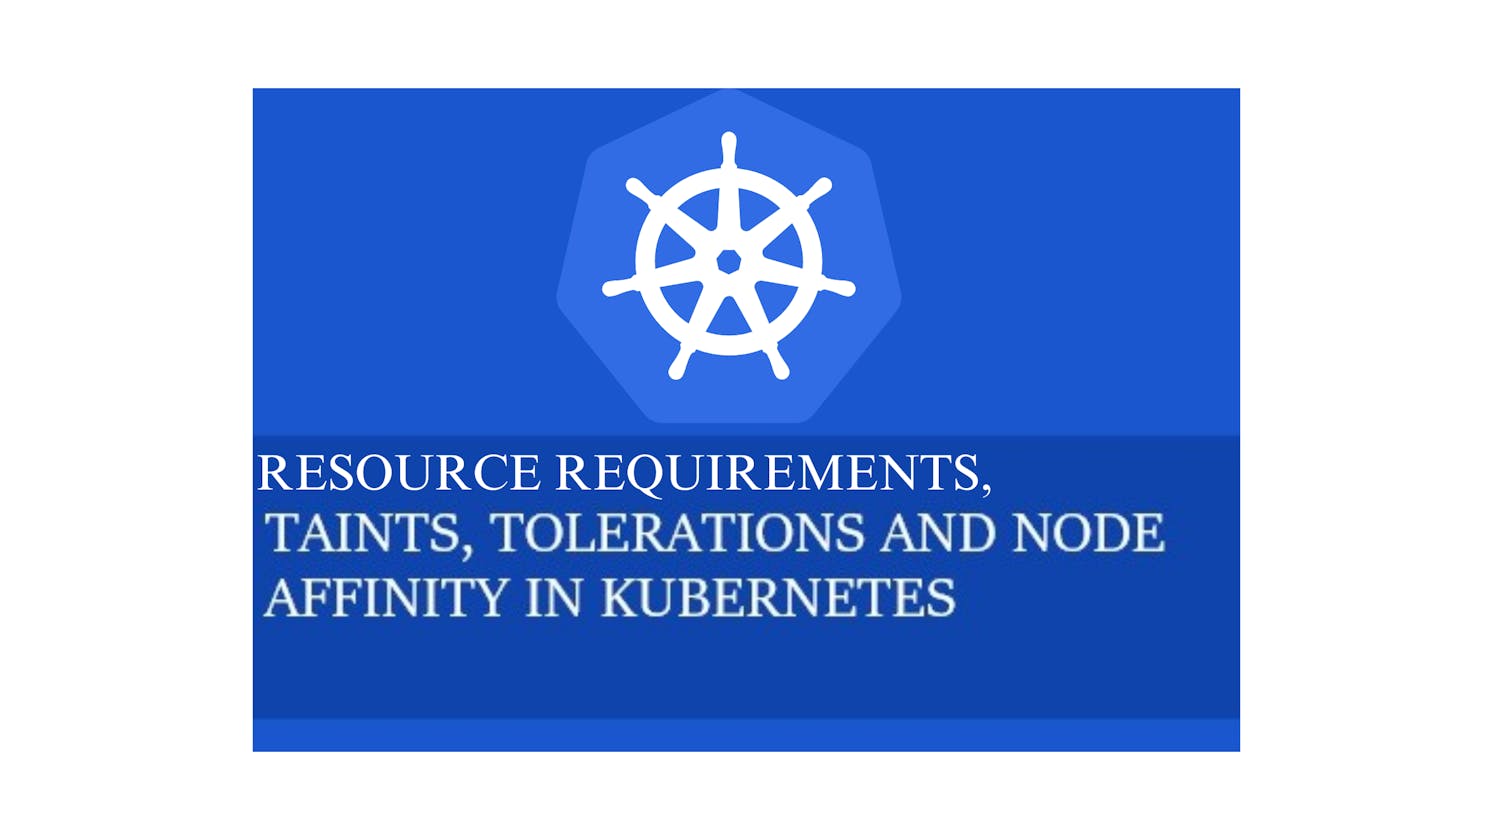 Understanding Resource Requirements, Taints and Tolerations, and Node Affinity in Kubernetes